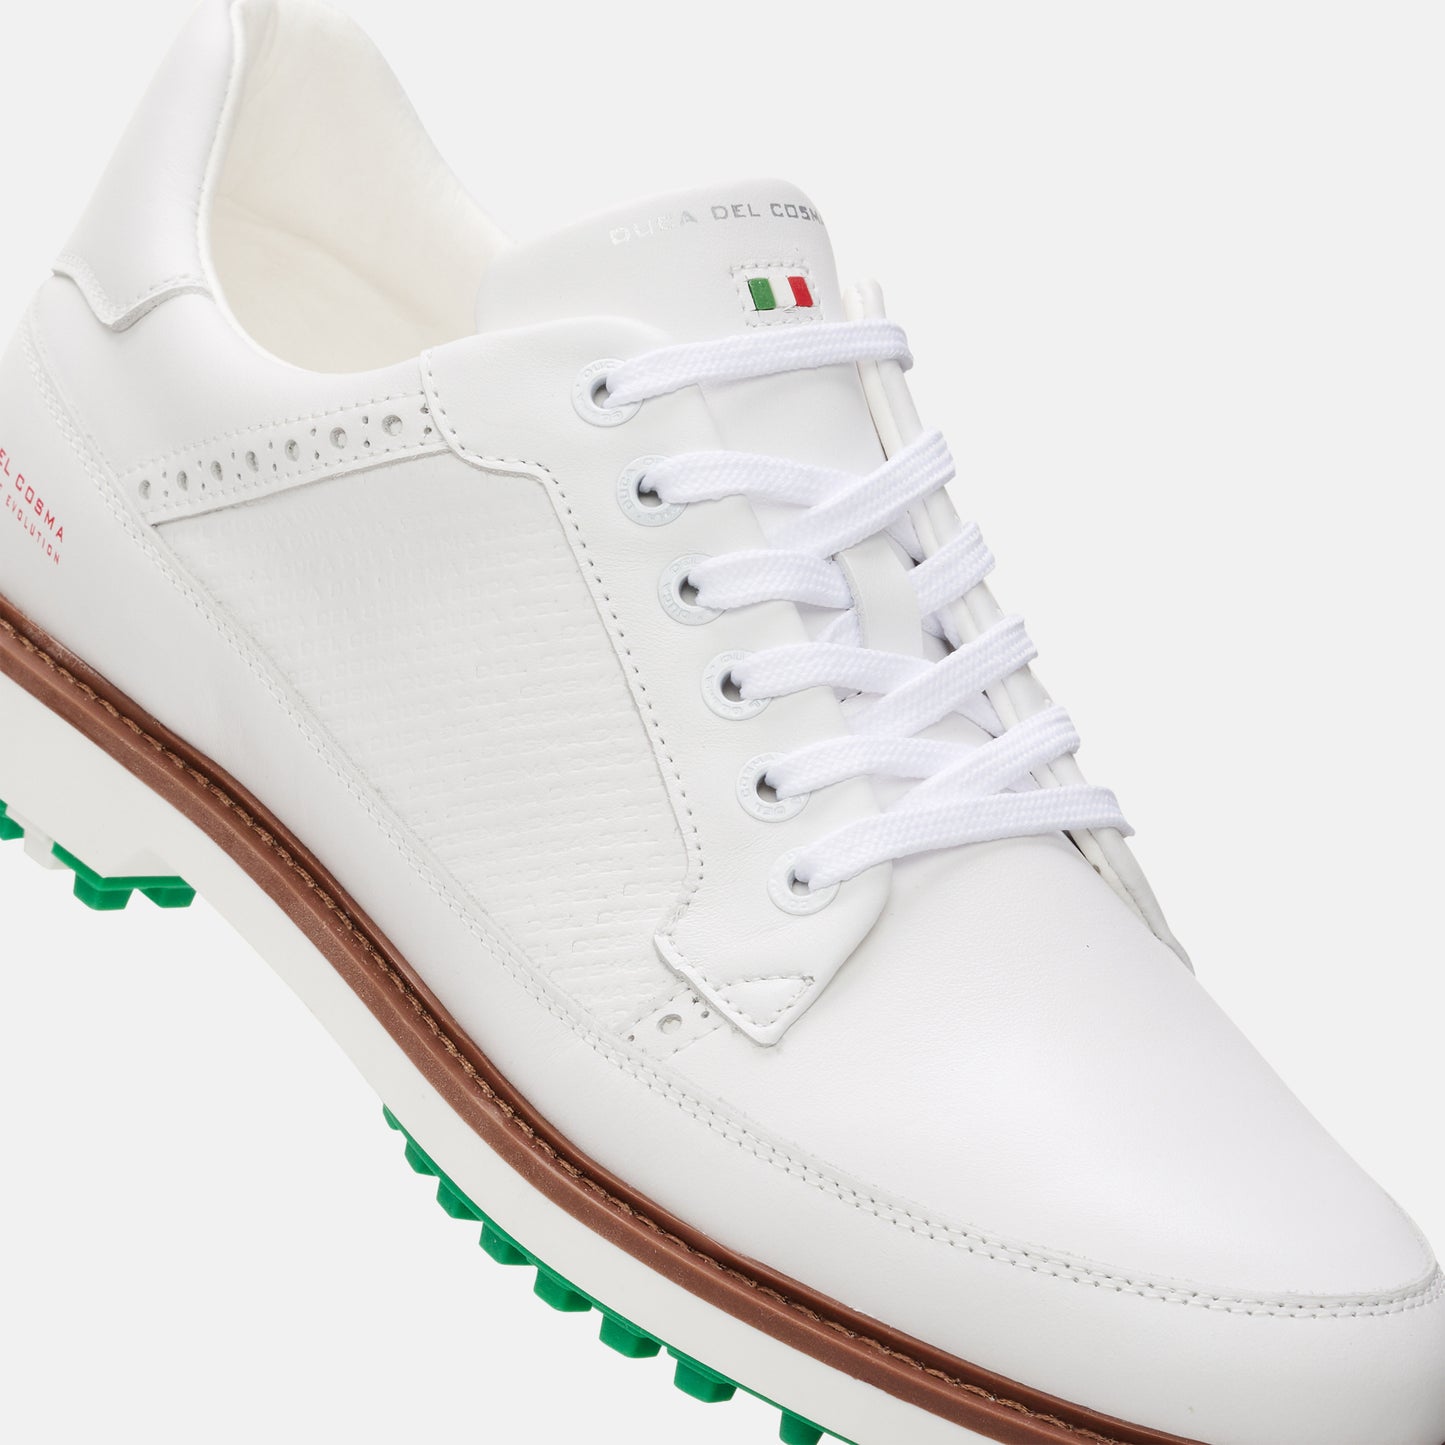 Lightweight Golf Shoes, White Golf Shoes, Waterproof Golf Shoes, Spikeless Golf Shoes, Duca del Cosma Men's Golf Shoes, Classic golf shoes.